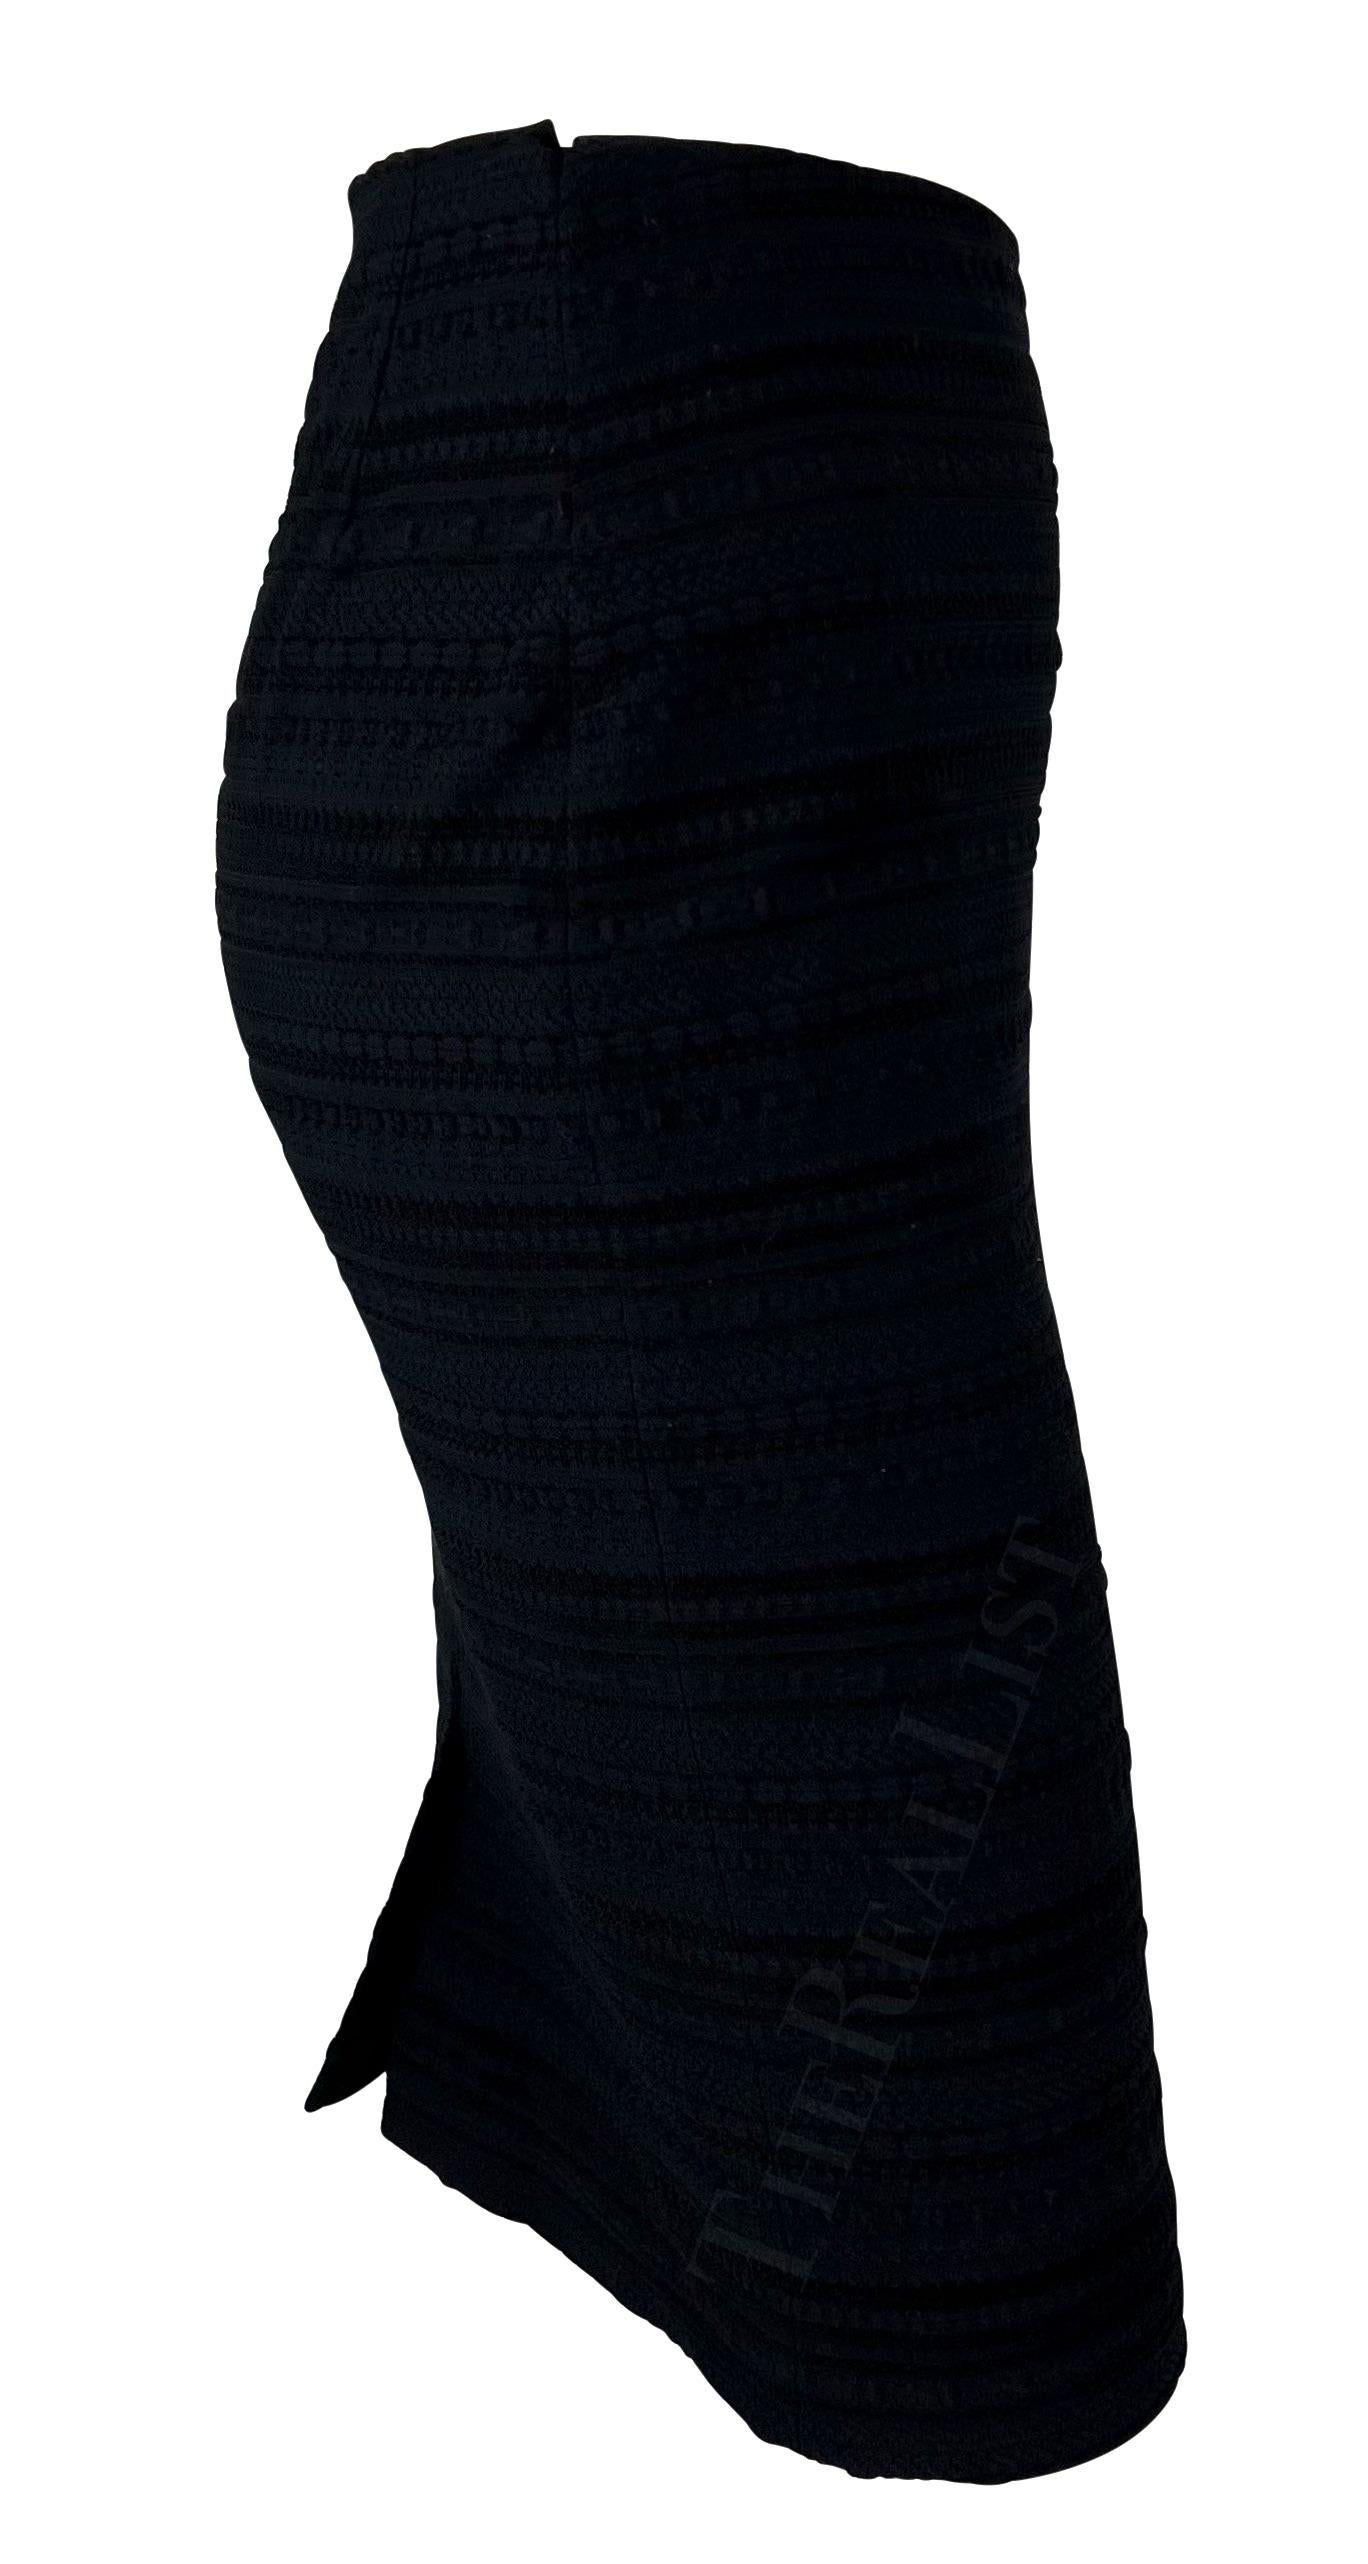 Late 1990s Dolce & Gabbana Black Textured Knit Woven Bodycon Pencil Skirt For Sale 1